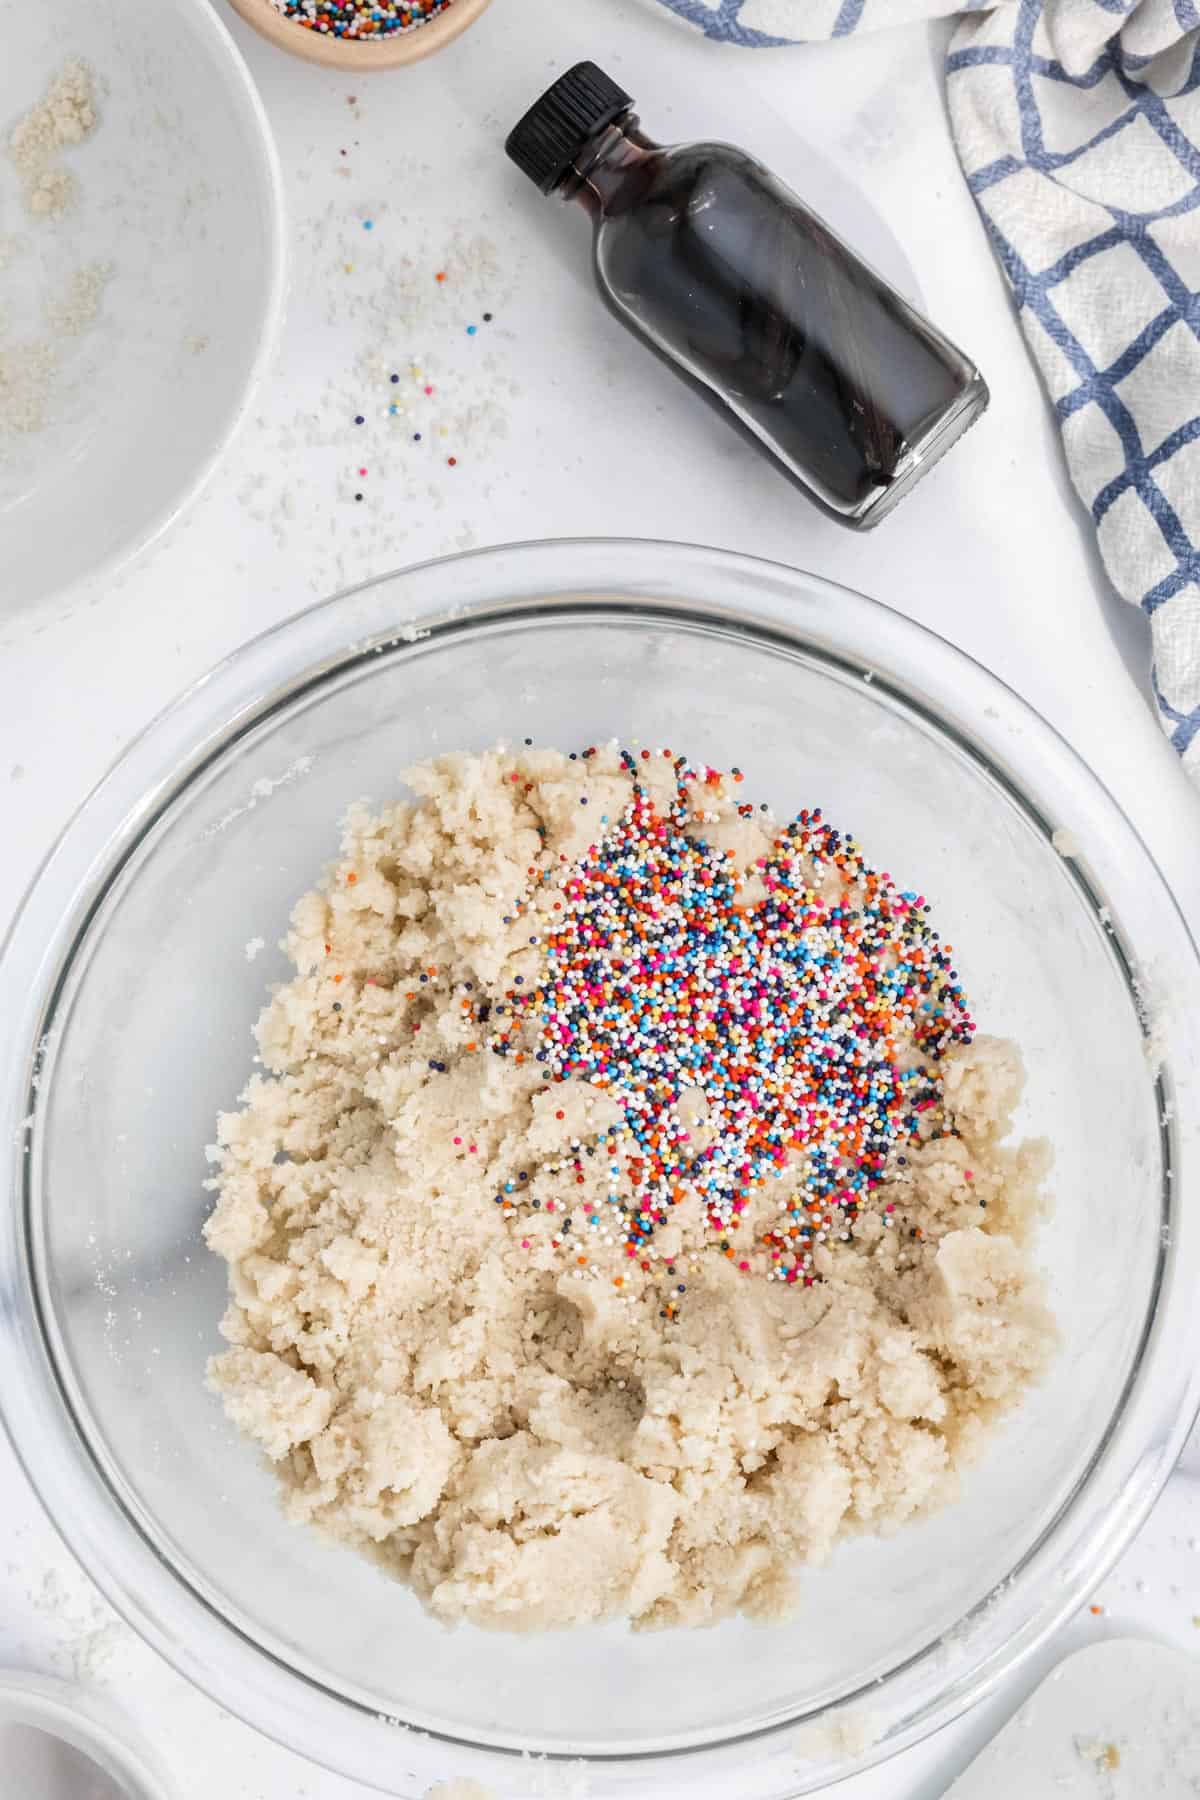 Adding rainbow sprinkles to the batter.